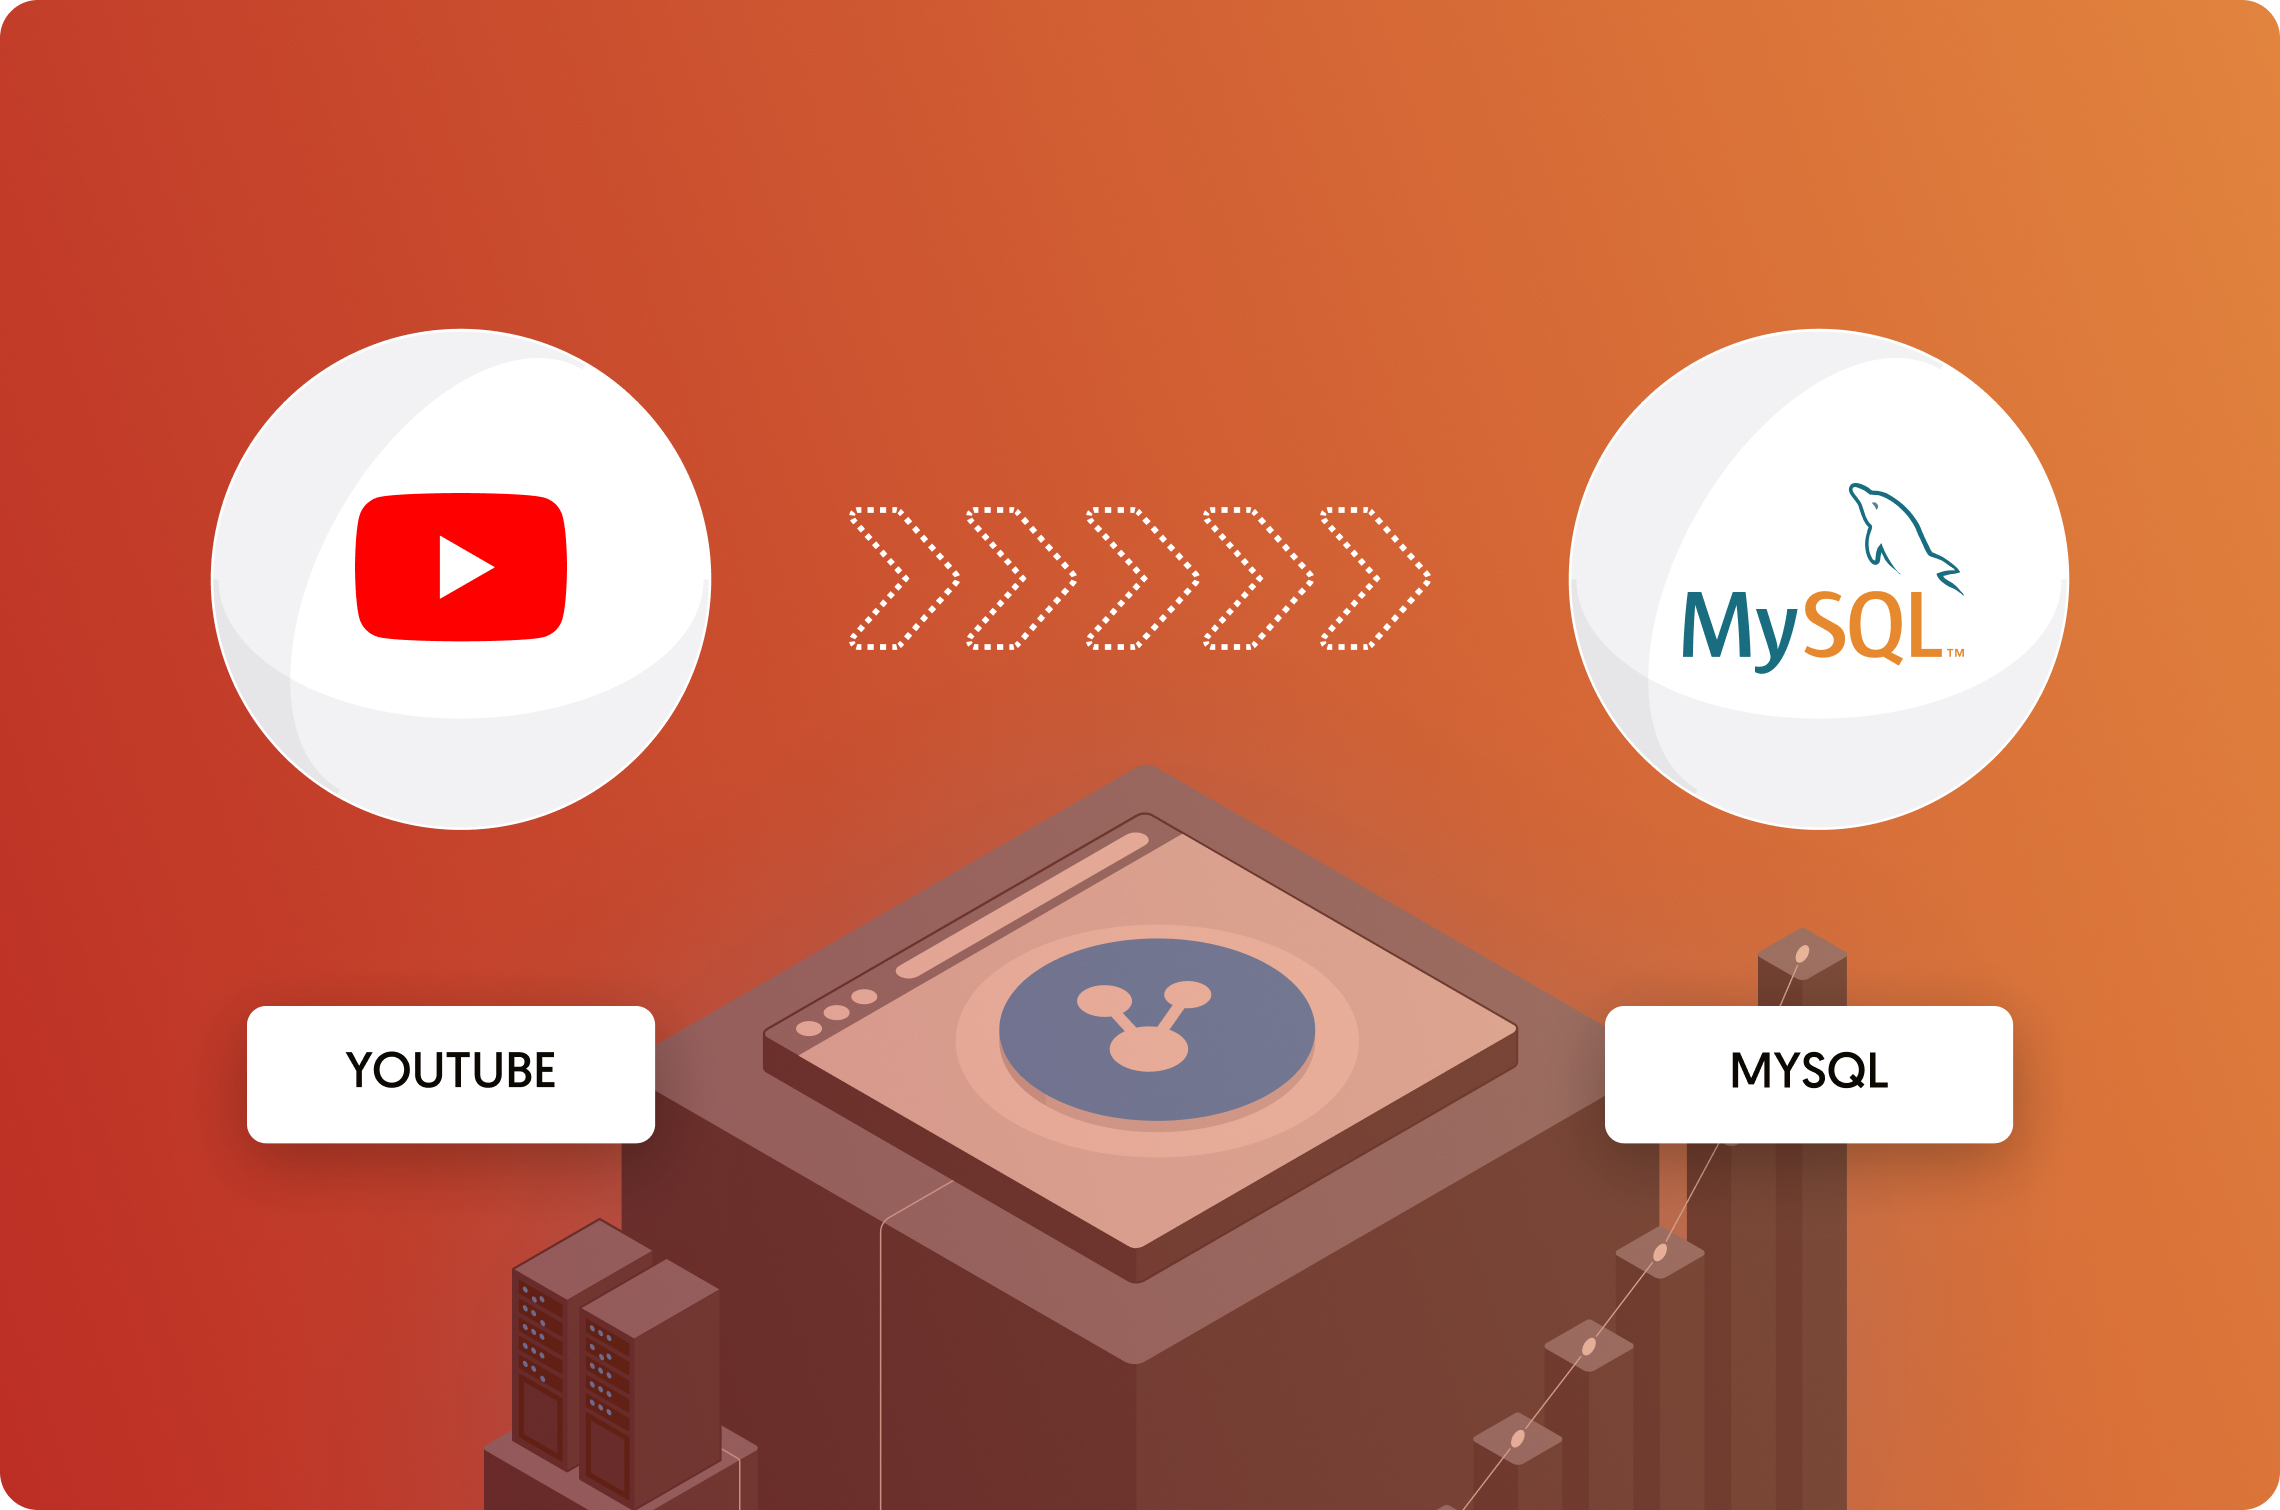 YouTube to MySQL: How to Securely Connect Your Data in 3 Simple Steps